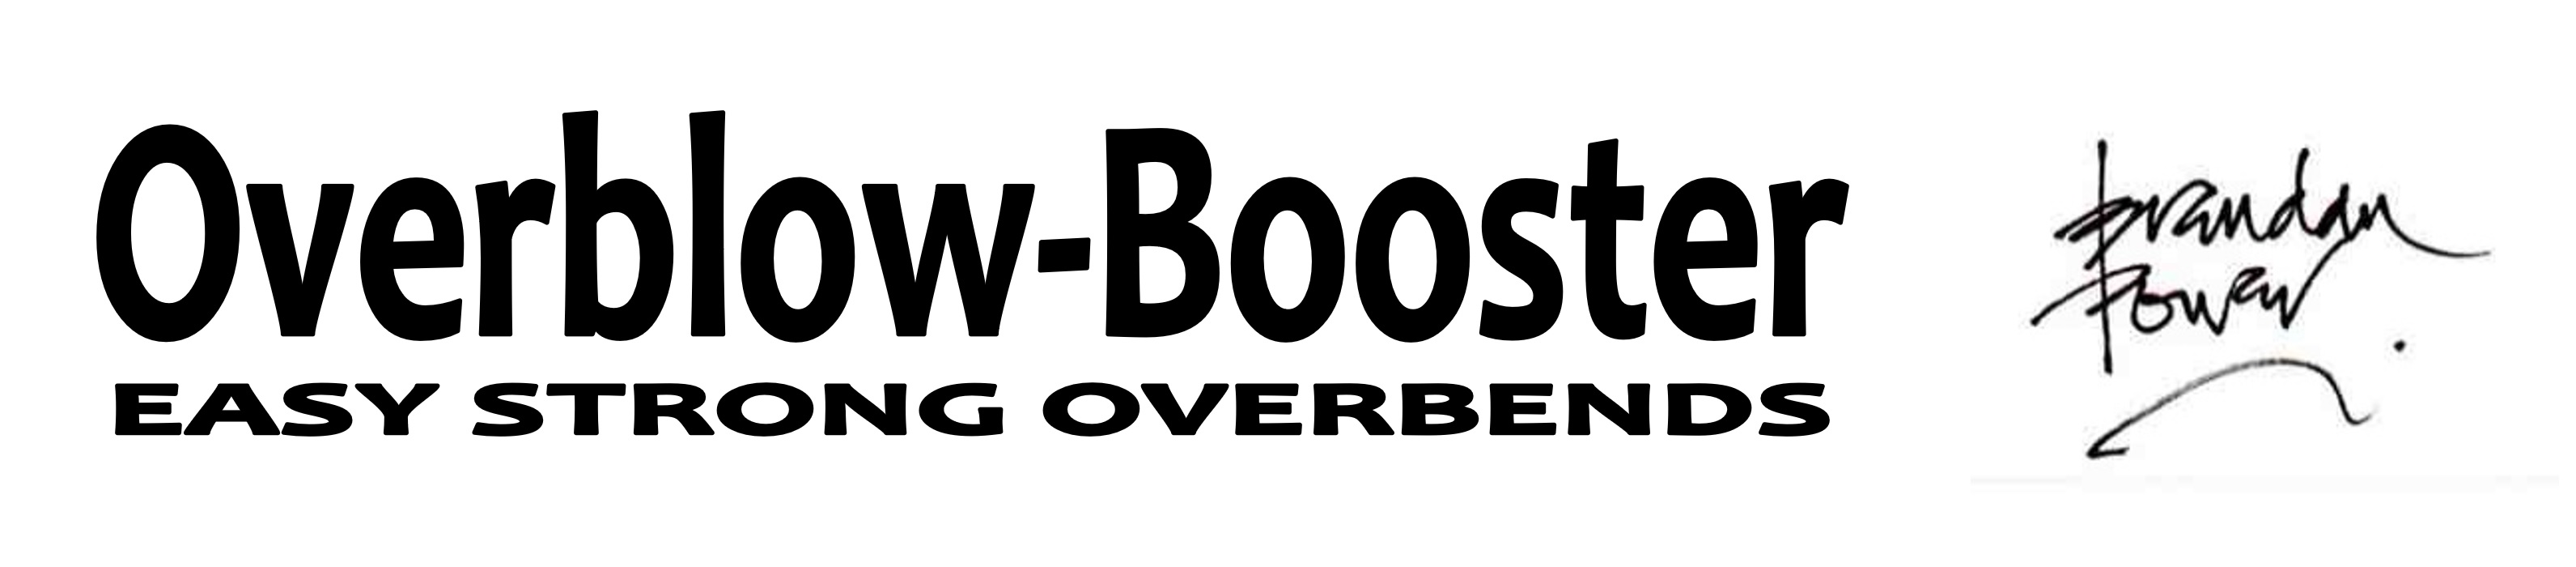 OverBlow Booster Logo